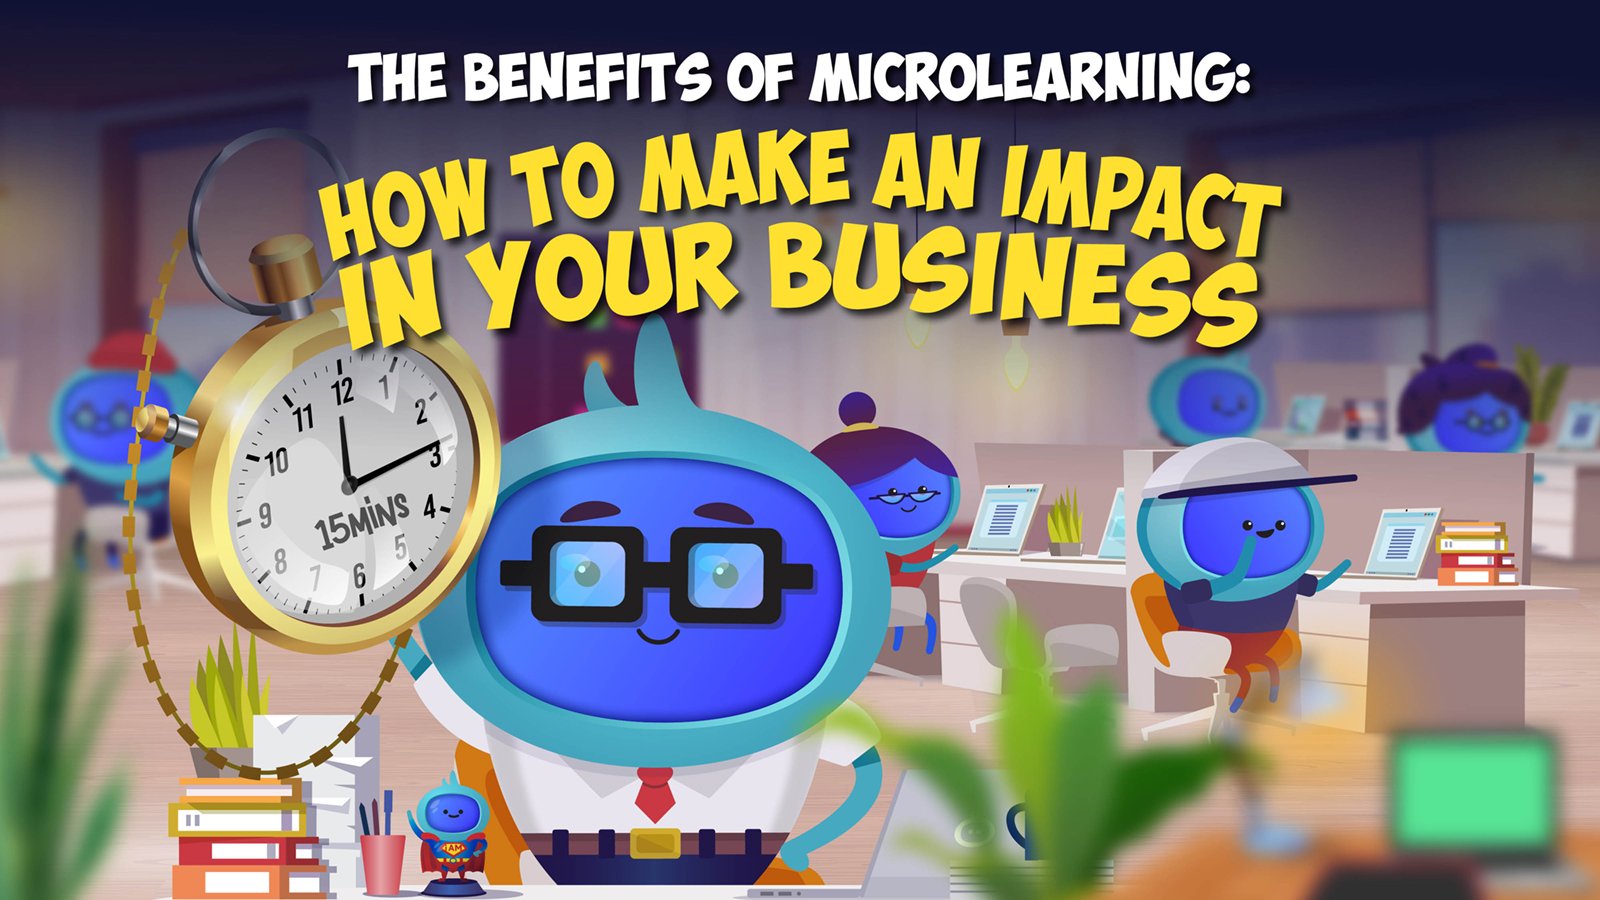 Microlearning How to Make an Impact in Your Business 1600x900-1